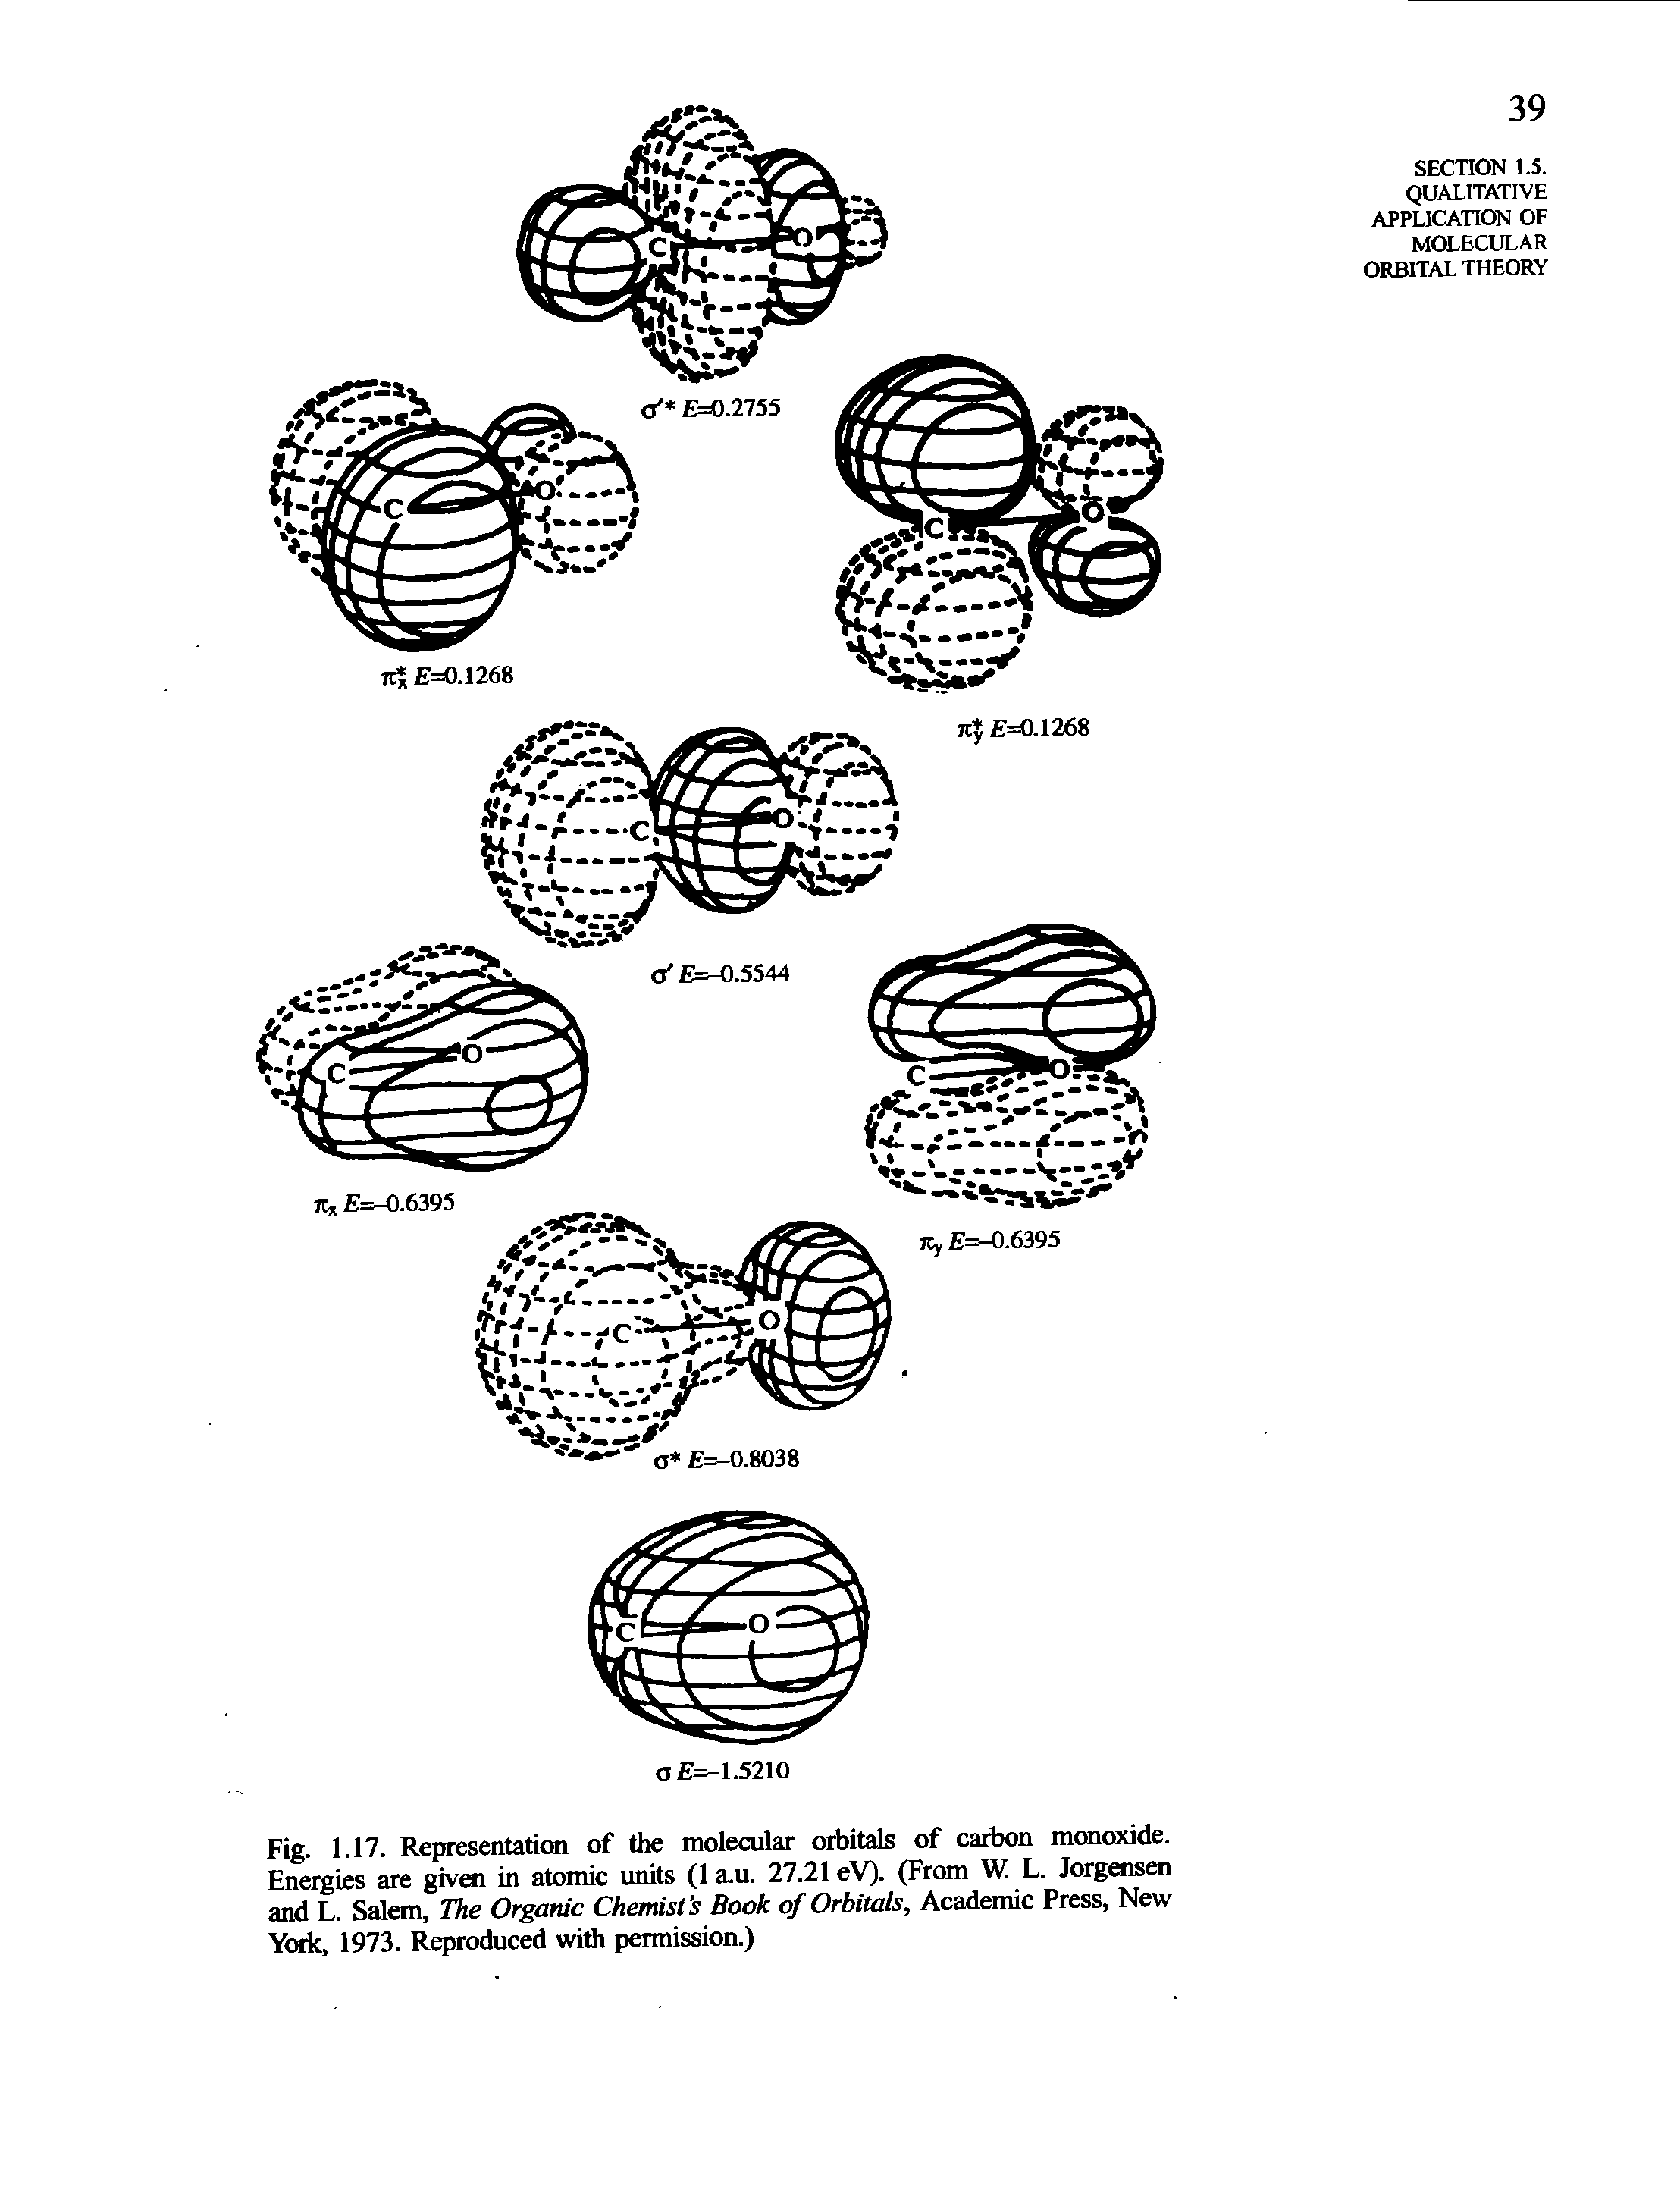 Fig. 1.17. Representation of the molecular orbitals of carbon monoxide. Energies are given in atomic units (1 a.u. 27.21 eV). (From W L. Jorgensen and L. Salem, 77i Organic Chemist s Book of Orbitals, Academic Press, New York, 1973. Reproduced wifli permission.)...